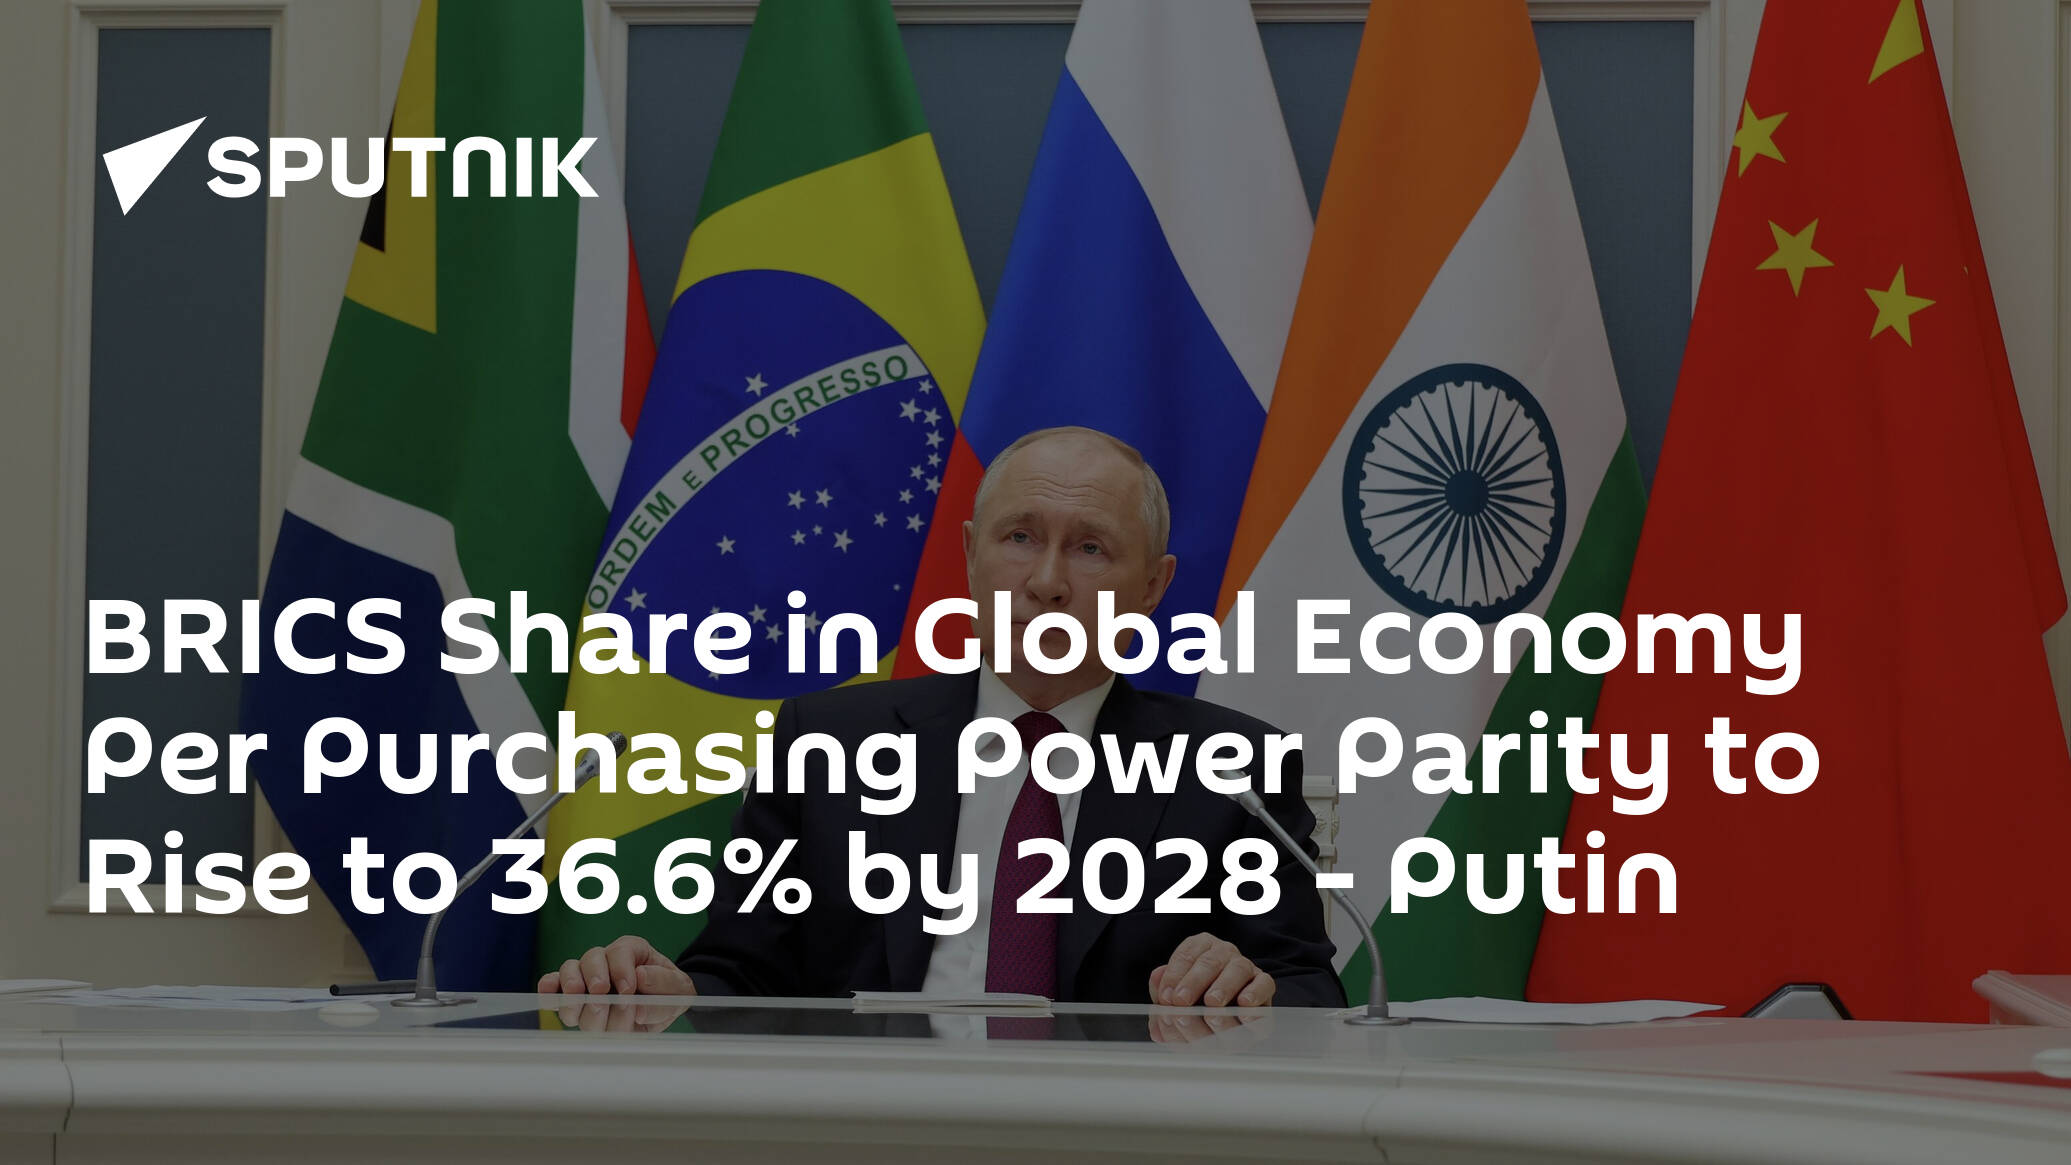 BRICS Share in Global Economy Per Purchasing Power Parity to Rise to 36.6% by 2028 – Putin